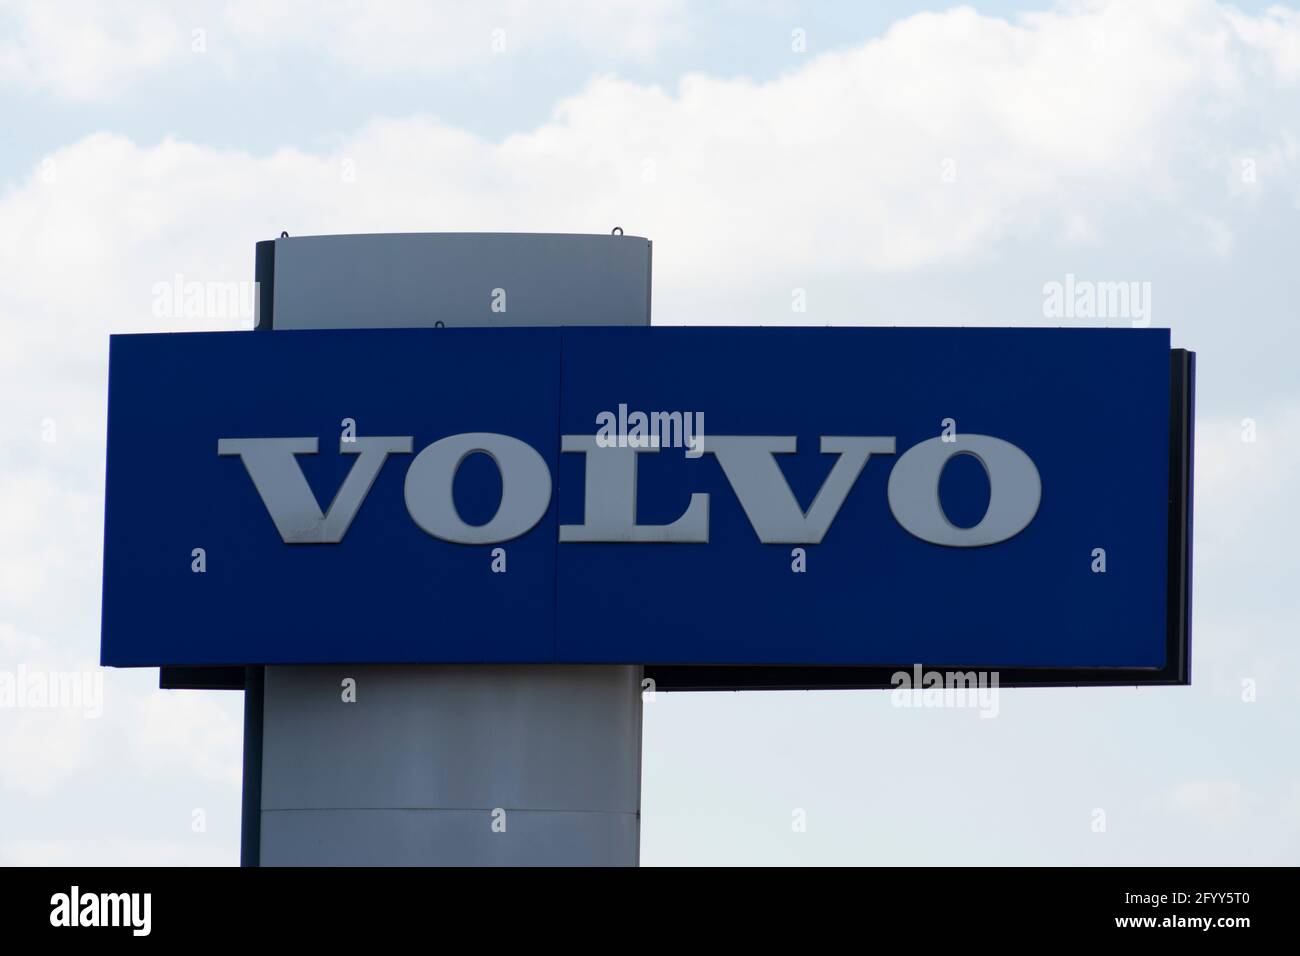 Volvo automobile dealership sign and logo. Volvo is a Swedish multinational manufacturing company, provider of trucks, buse, construction equipment Stock Photo